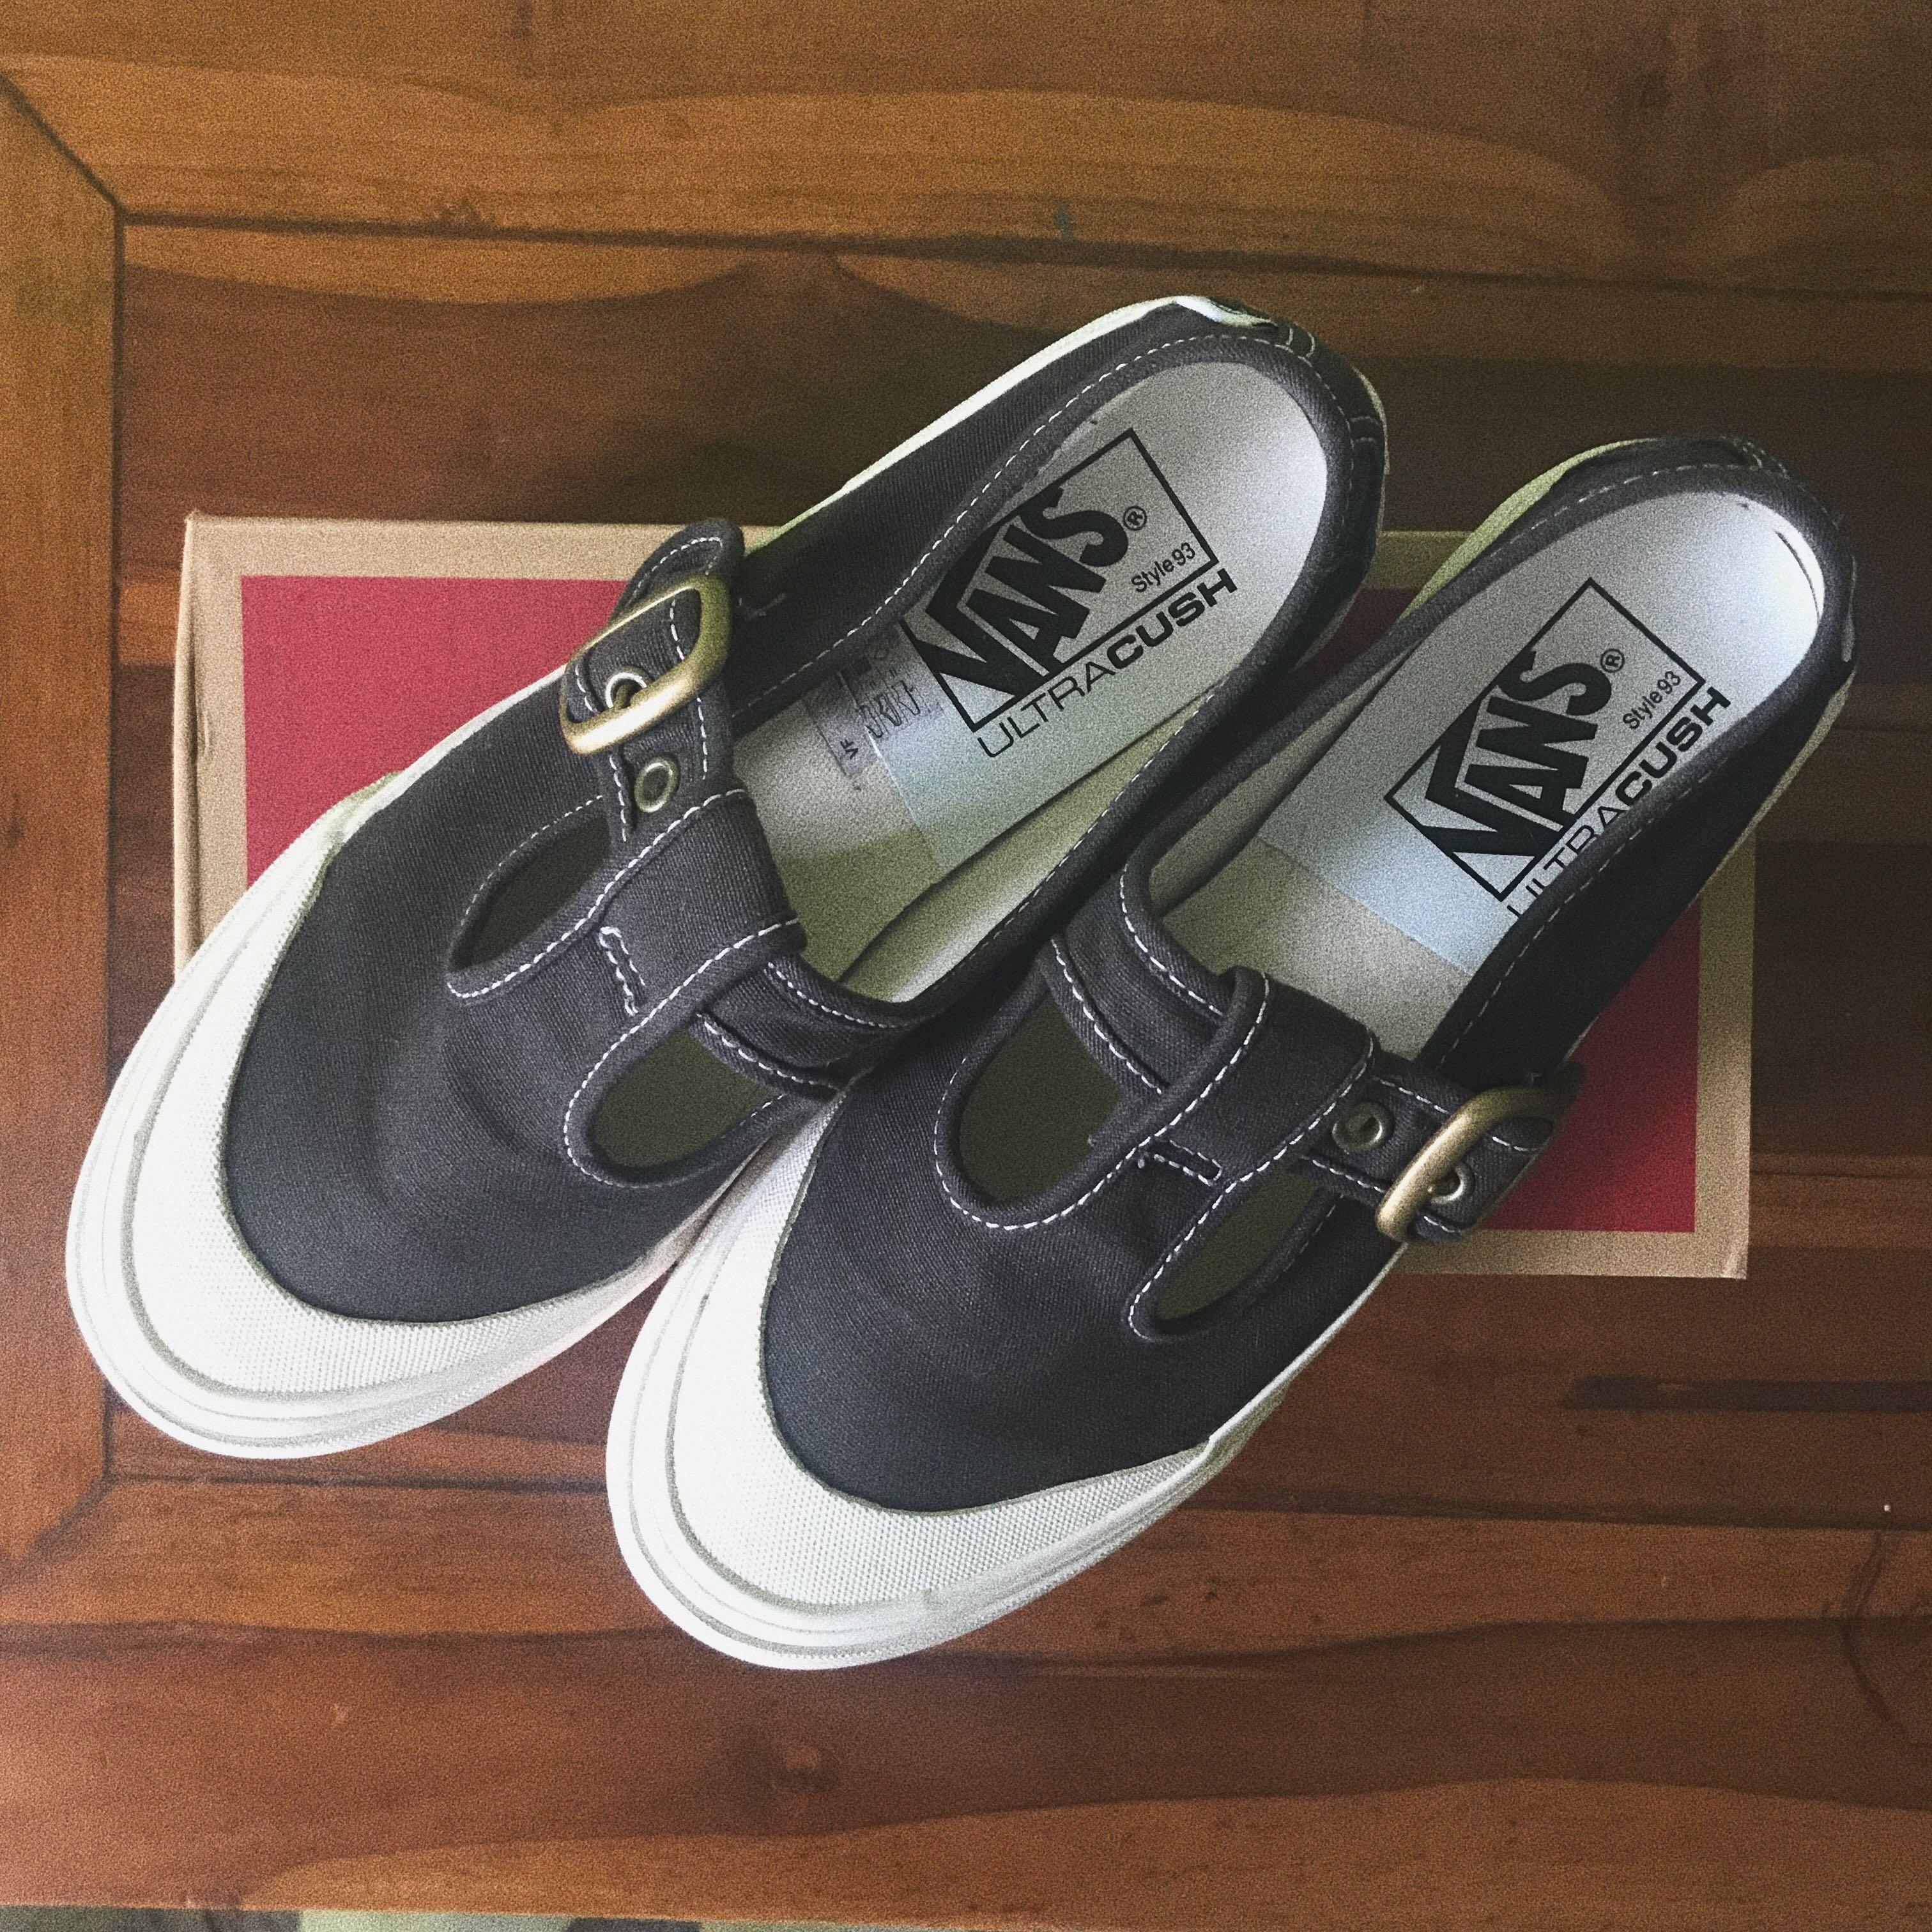 vans shoes in malaysia with prices